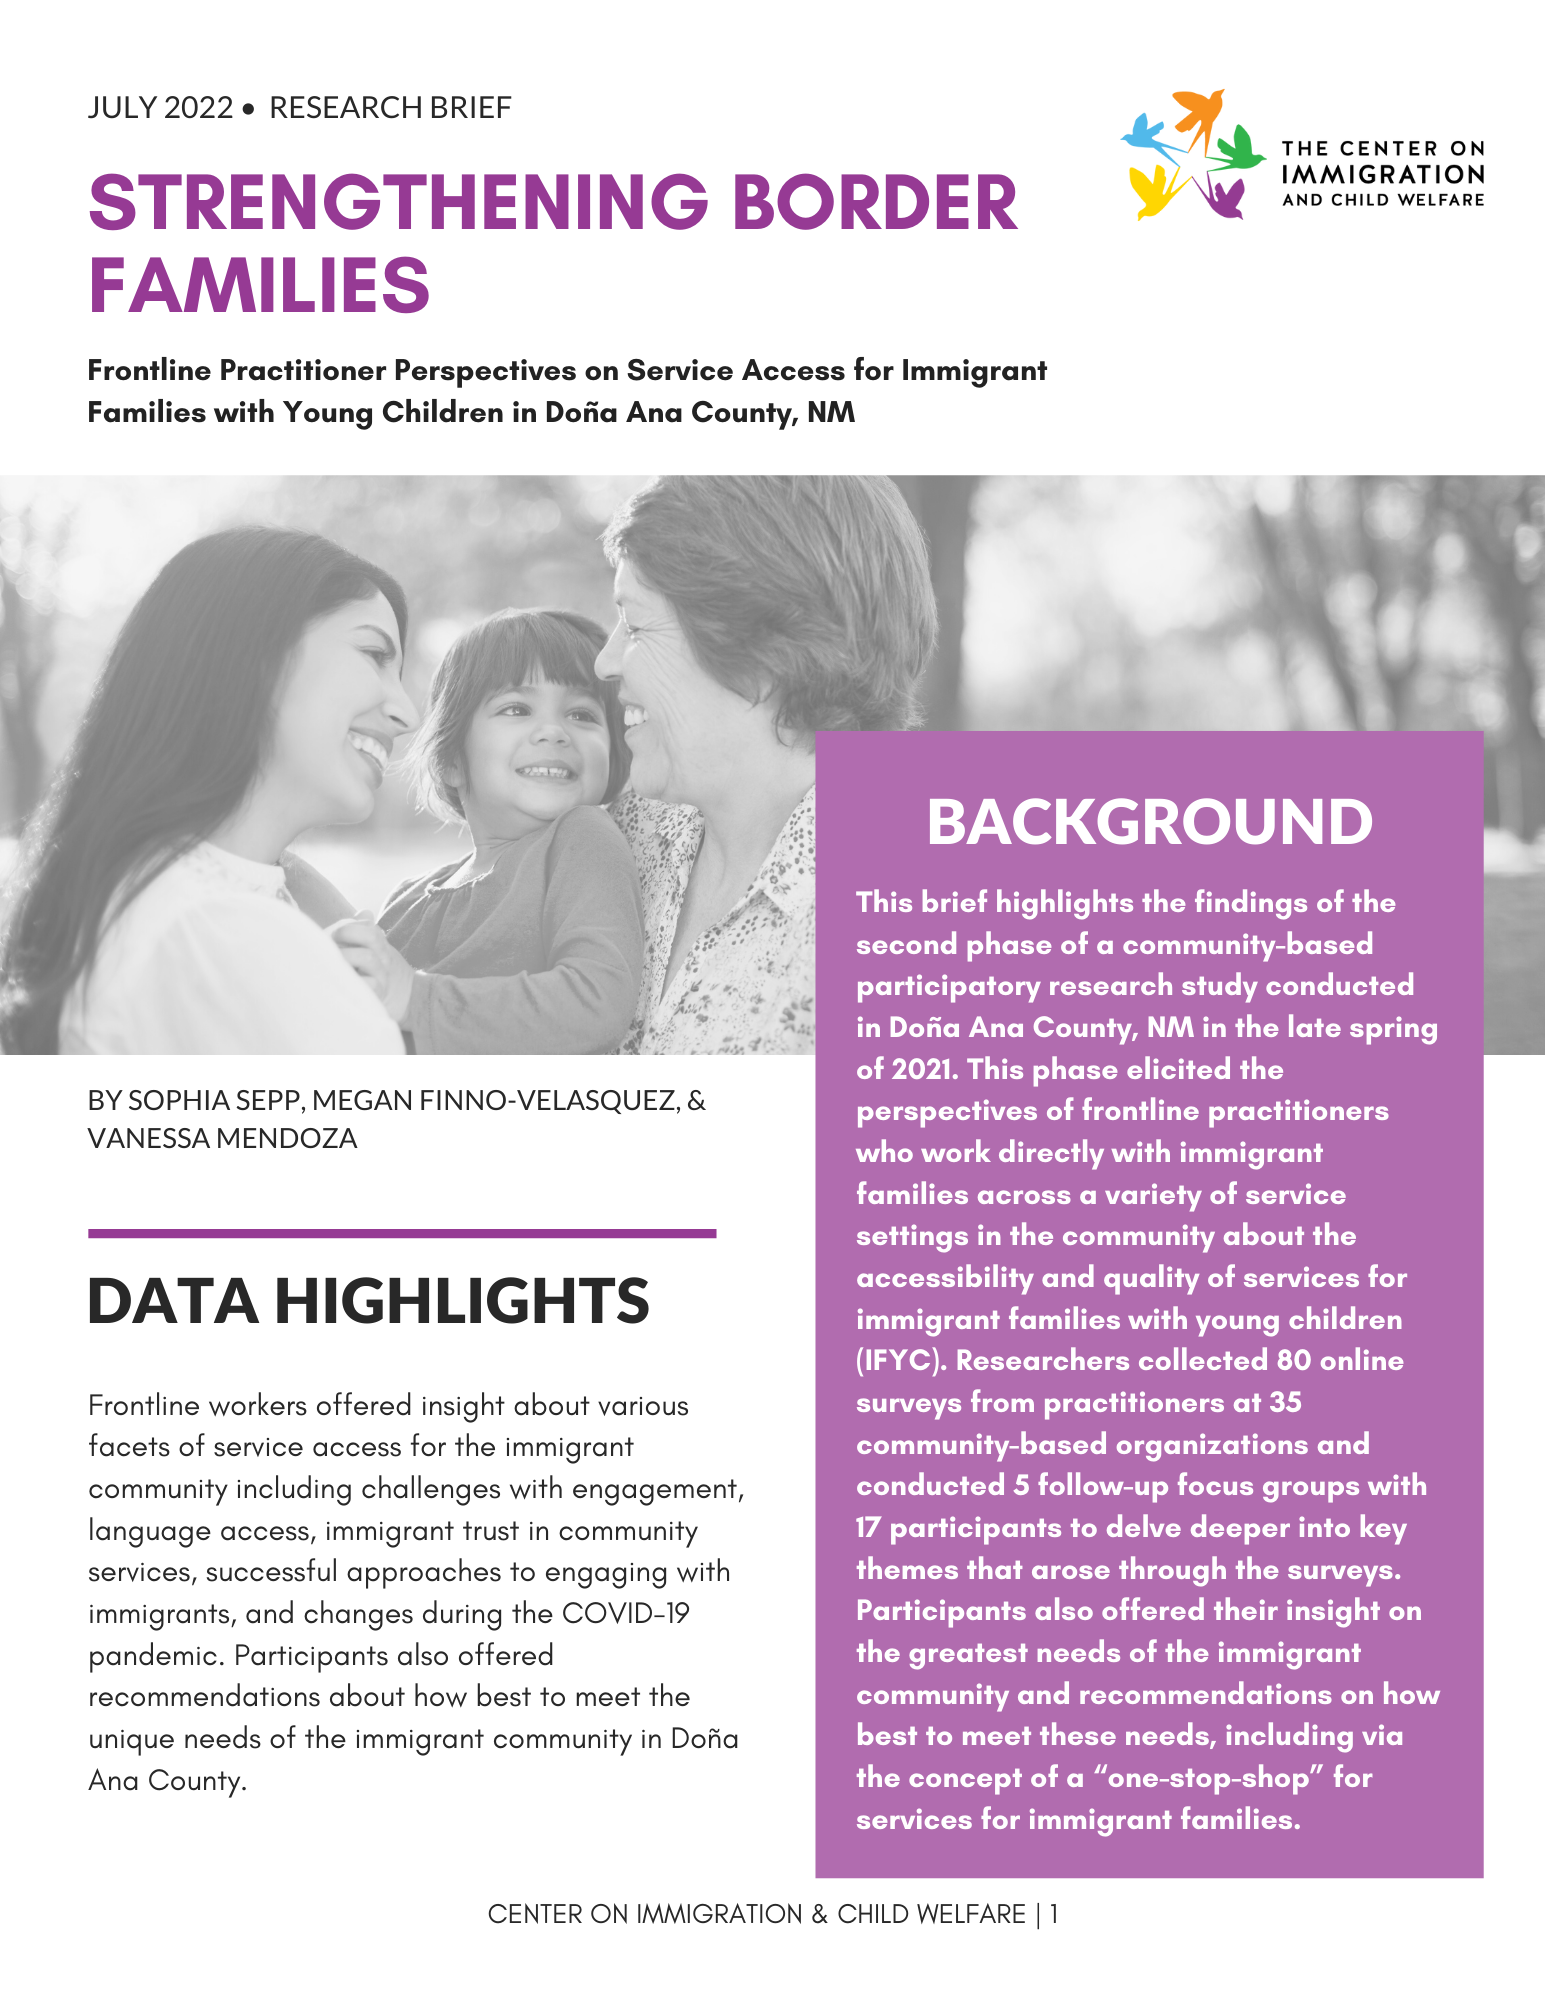 CICW Strengthening Border Families Research Project